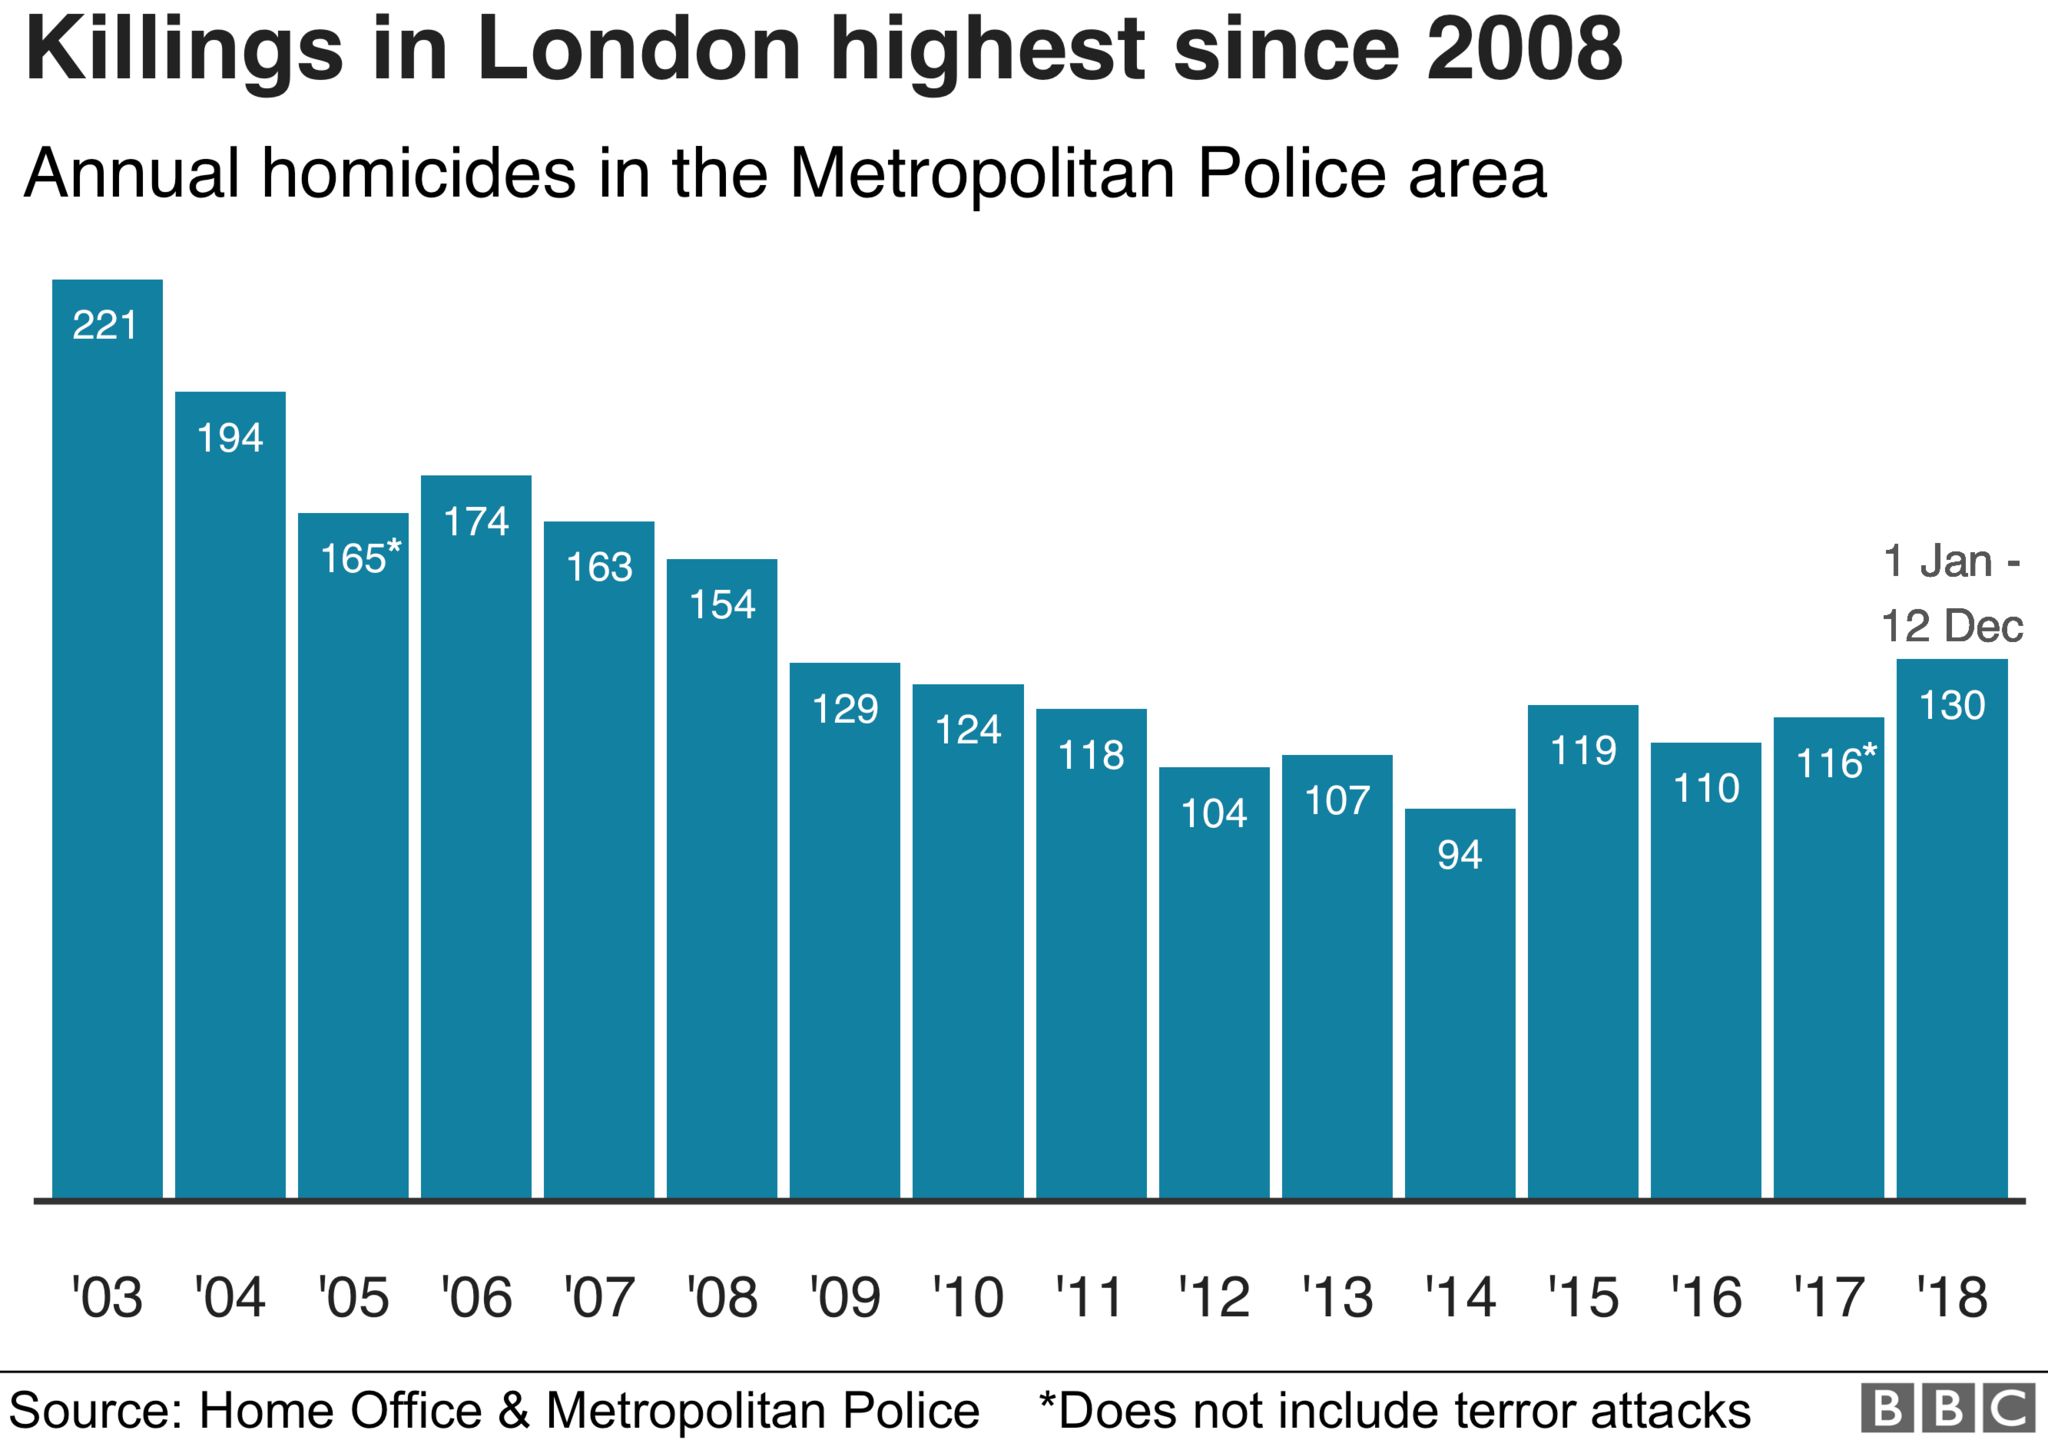 Killings in London reached 130 on 12th Dec. This is the highest number of killings in one year since 2008.